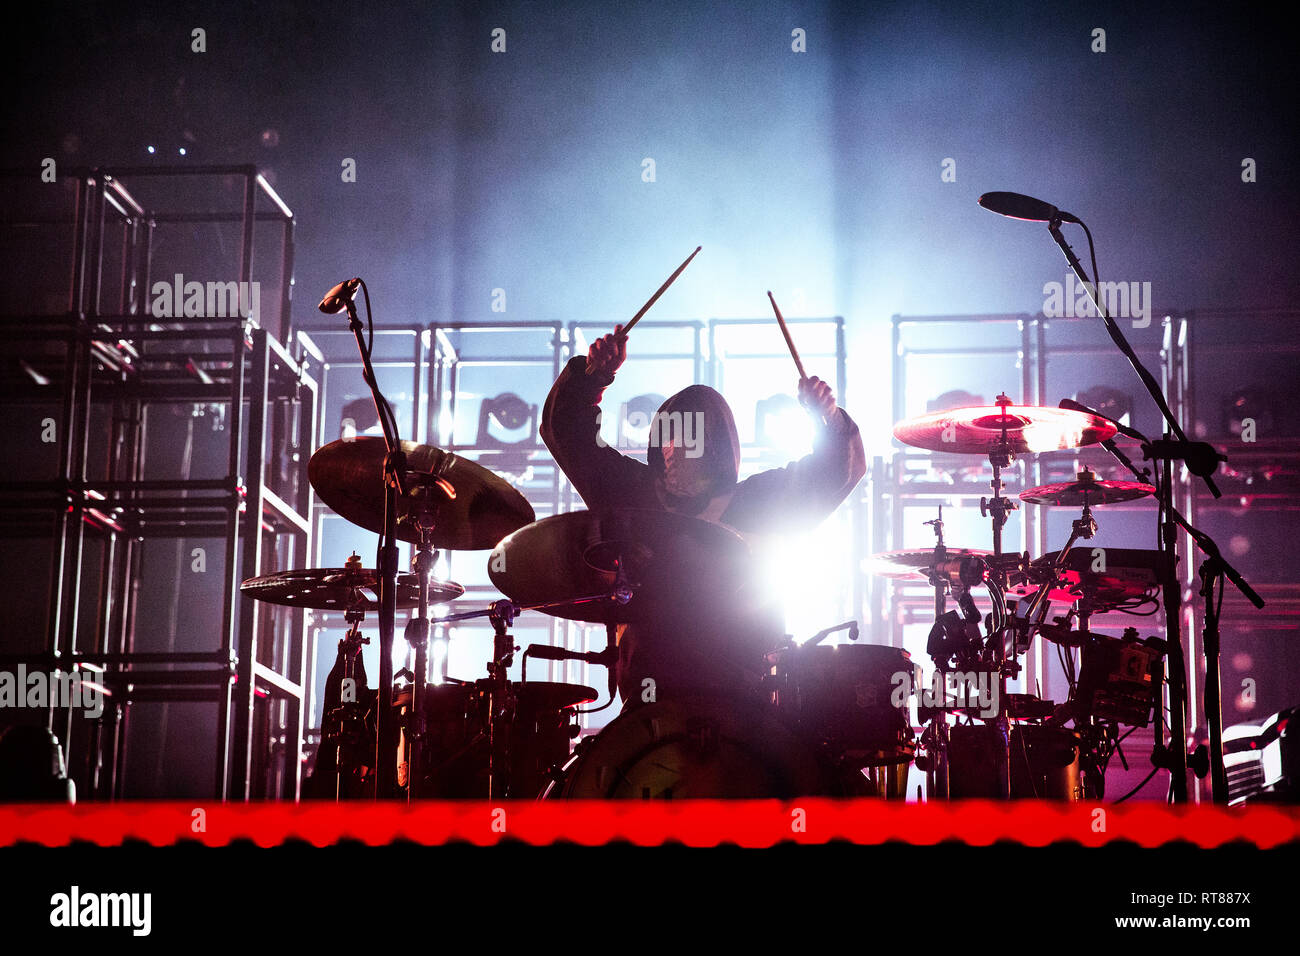 Norway, Oslo - February 9, 2019. The American duo Twenty One Pilots performs live concert at Telenor Arena in Oslo. Here drummer Josh Dun is seen live on stage. (Photo credit: Gonzales Photo - Terje Dokken). Stock Photo